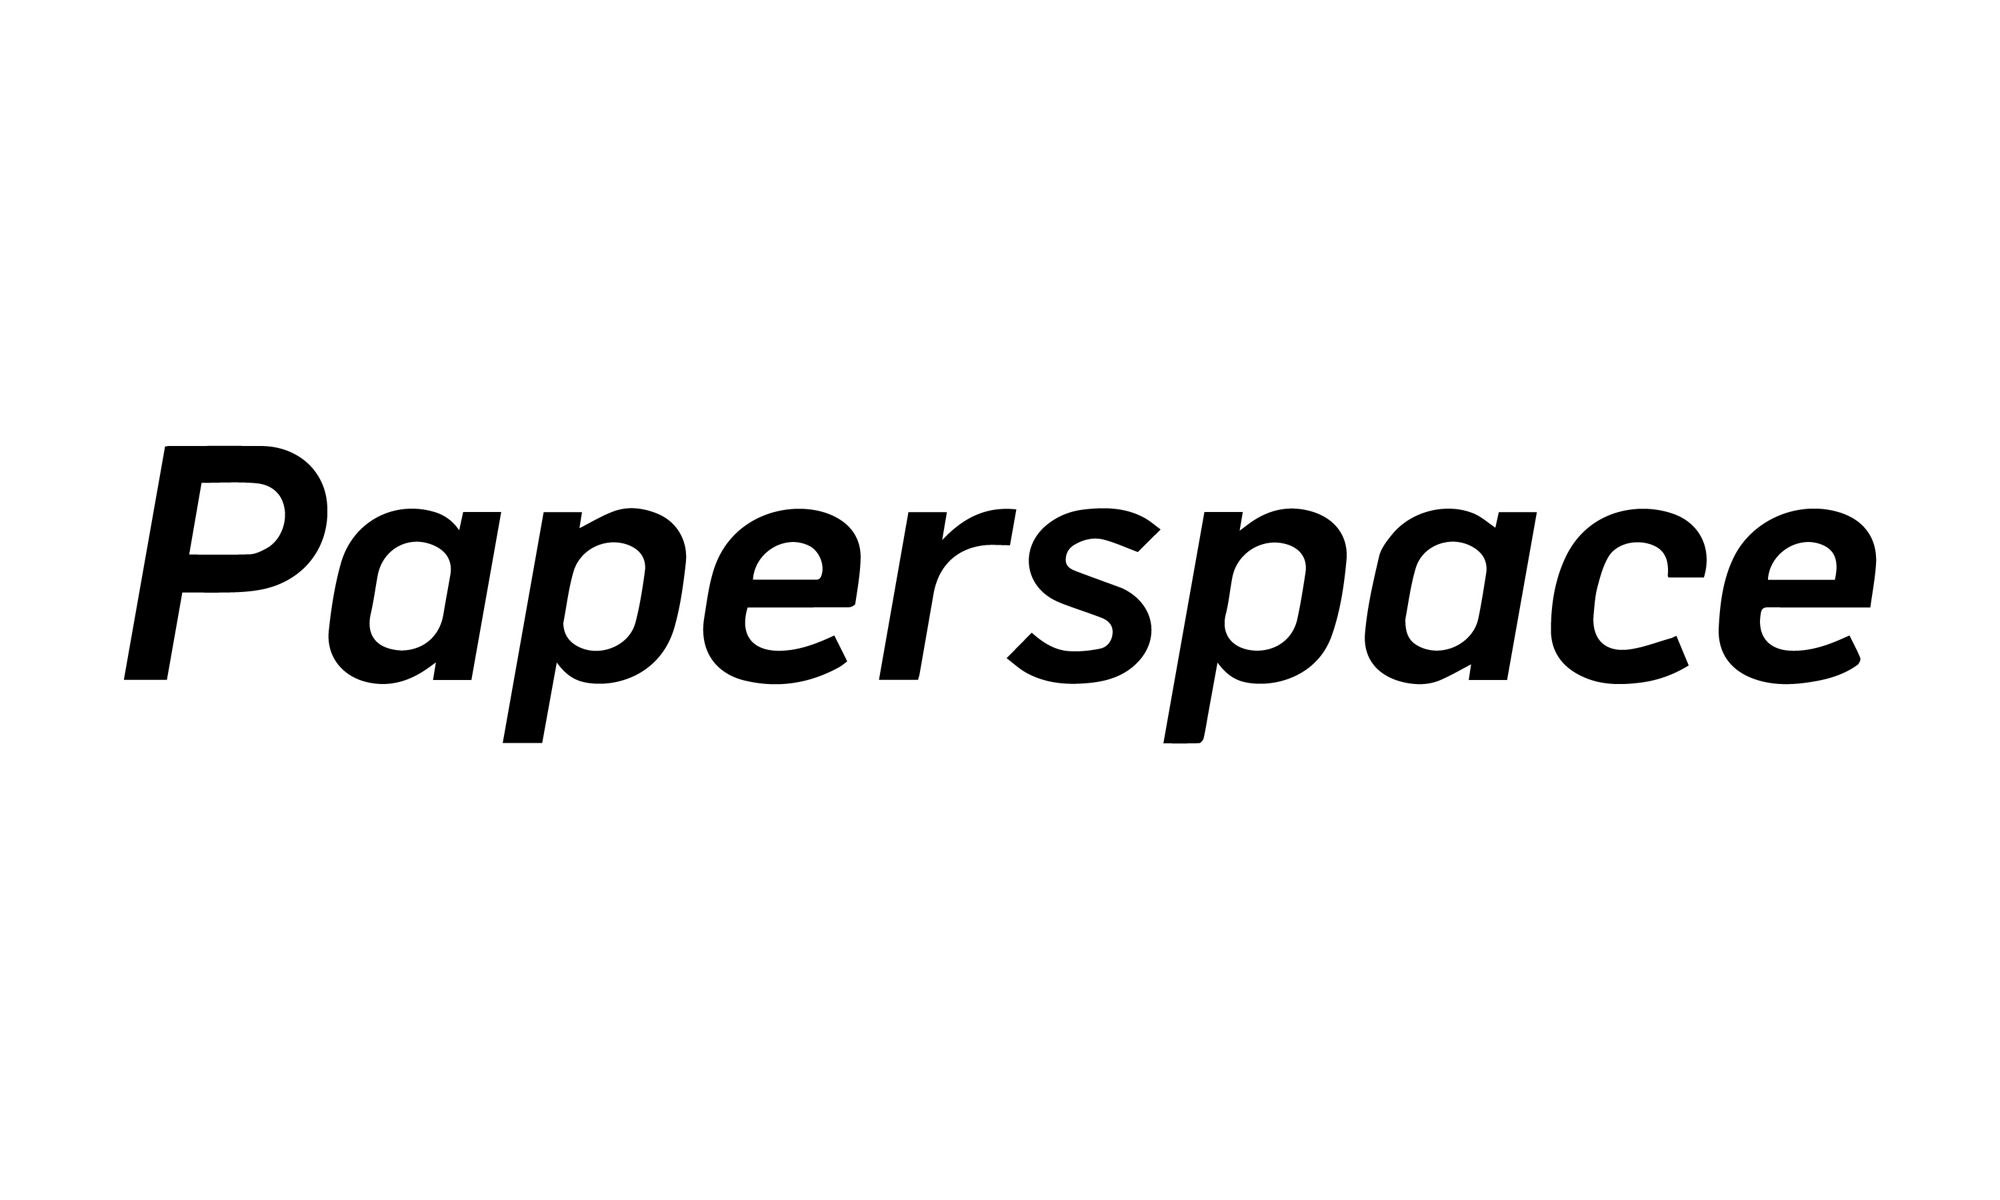 Paperspace company logo